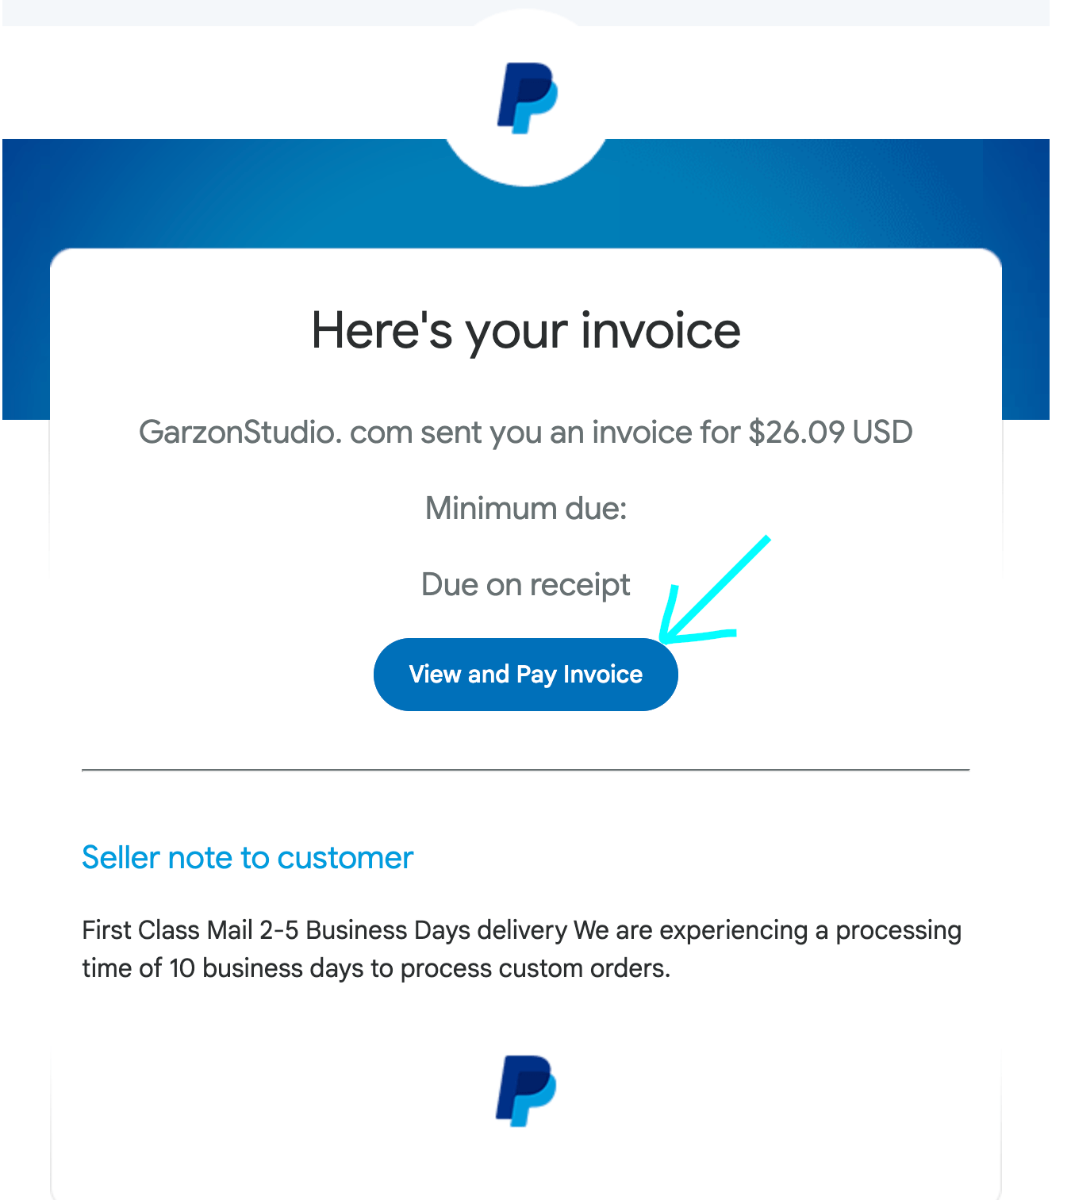 Paypal invoice - Pay Invoice